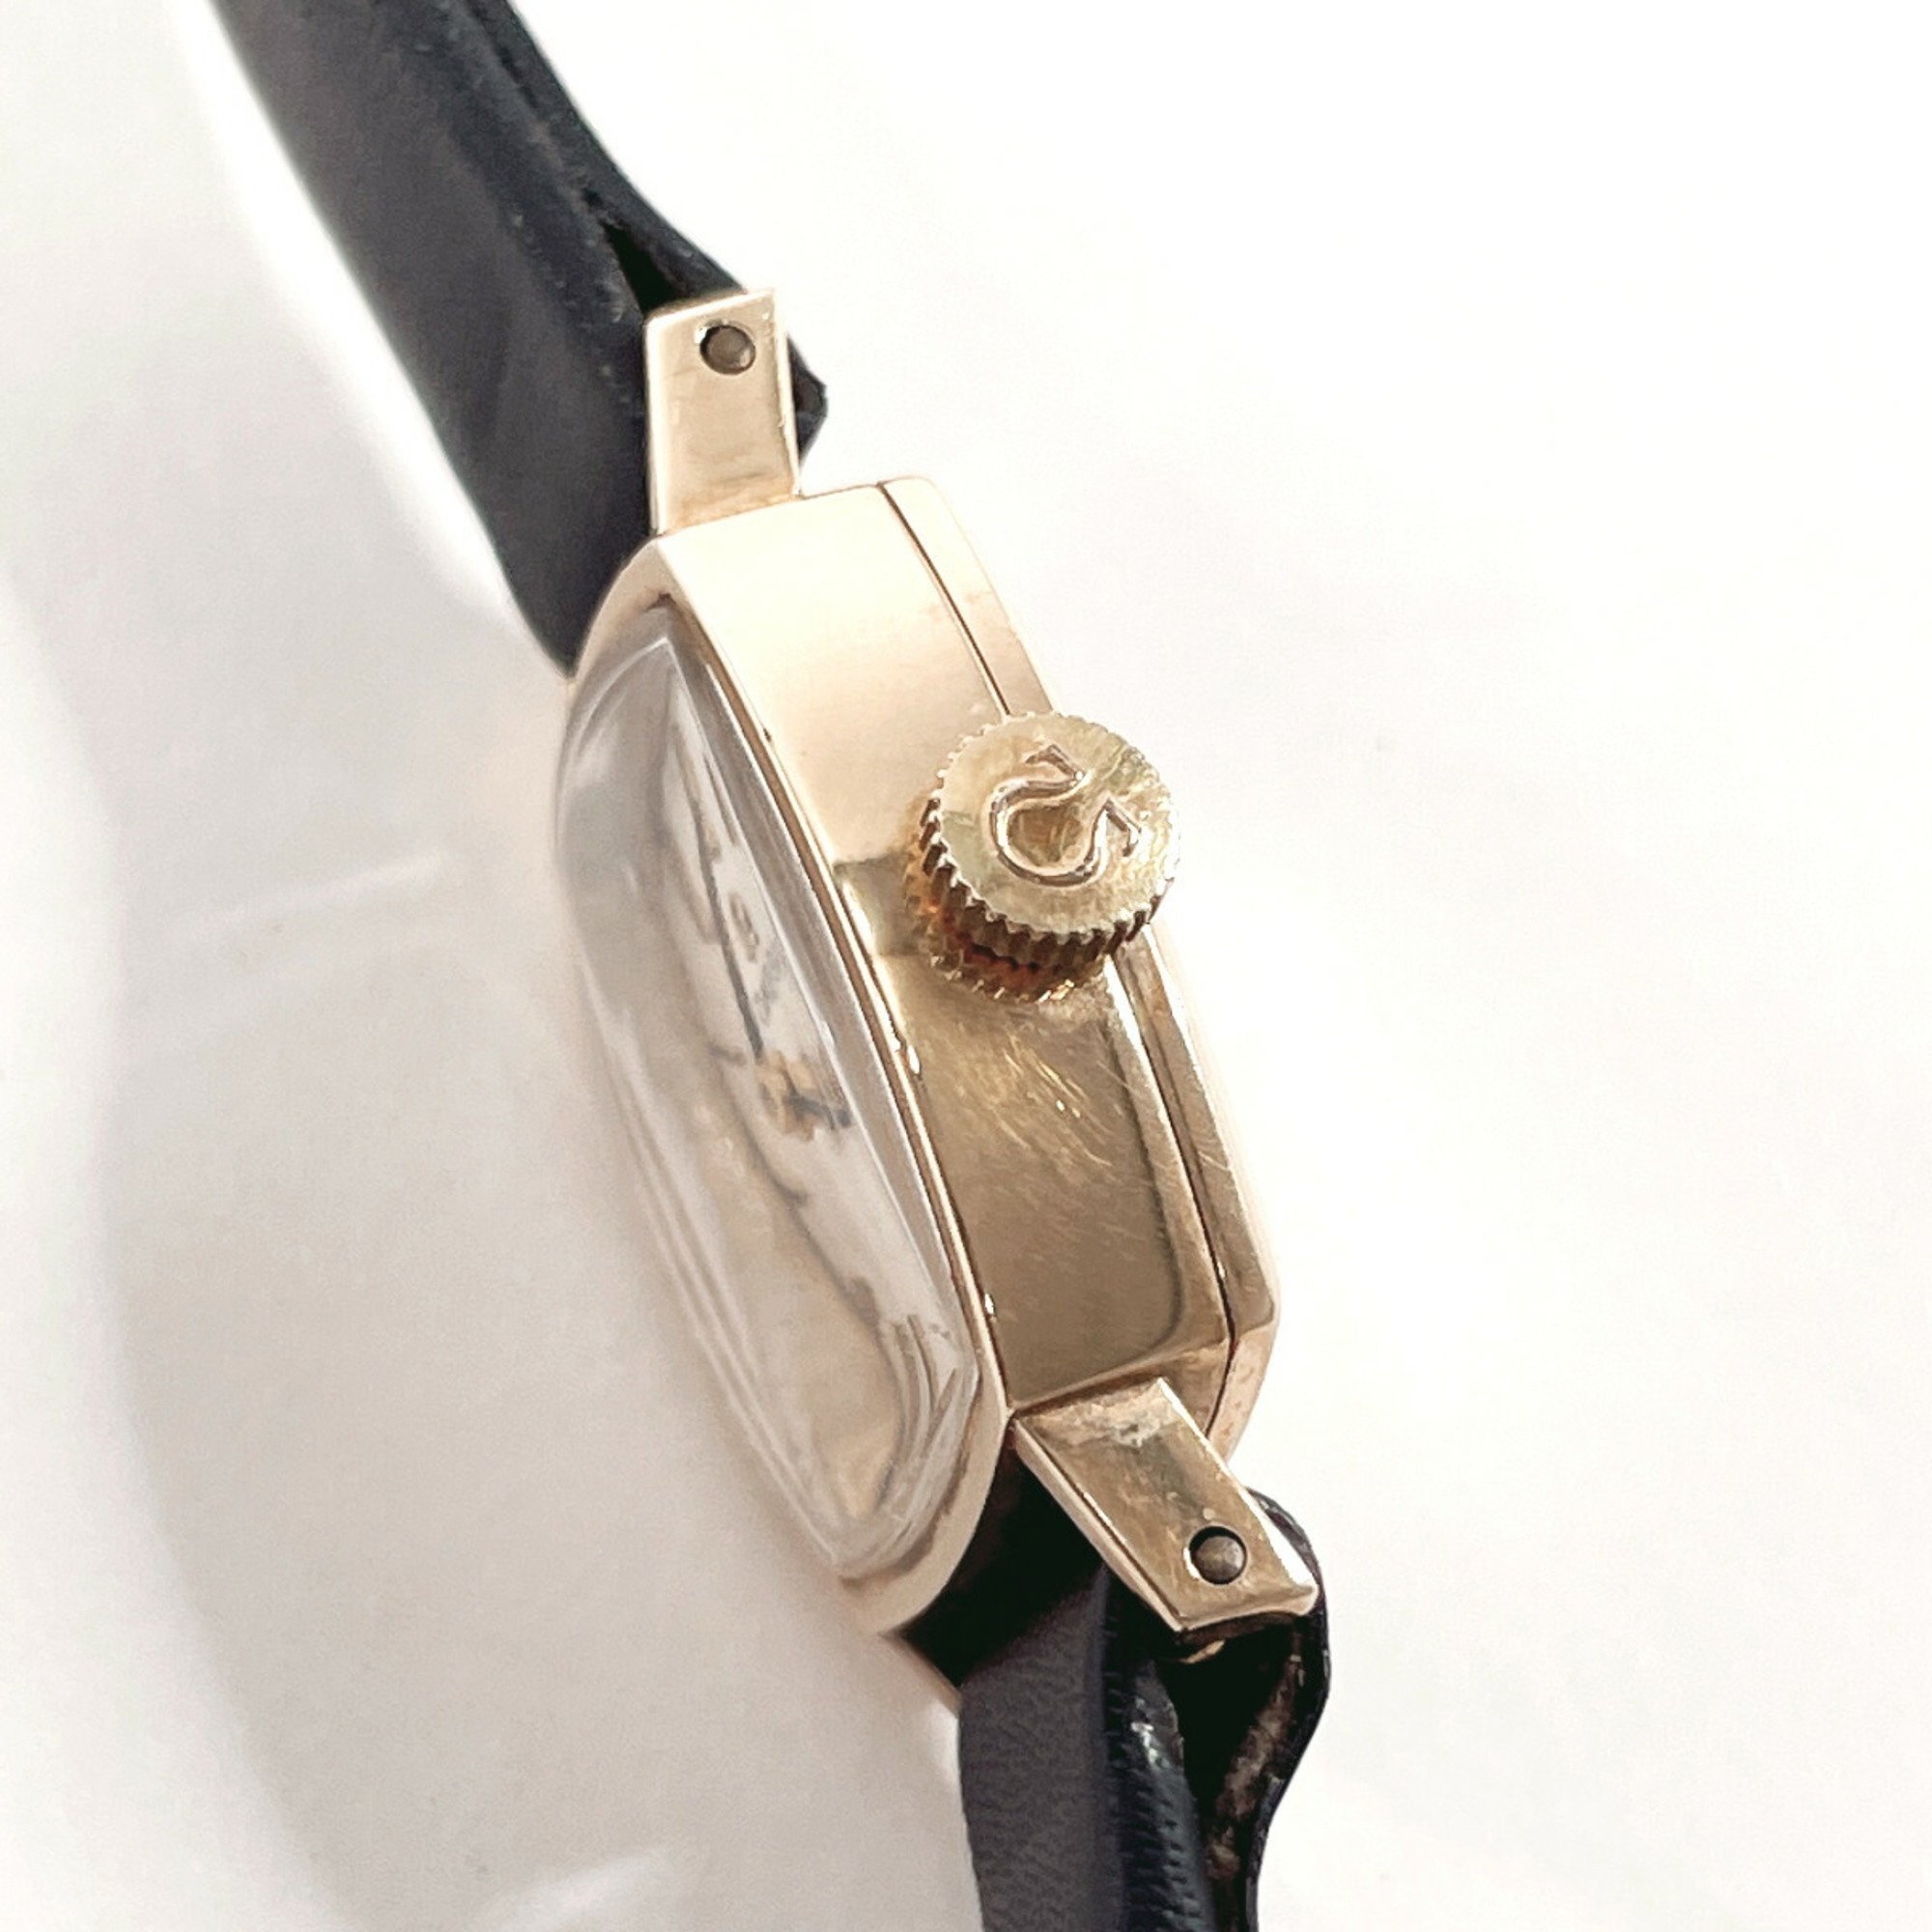 OMEGA Vintage 5115626 Watch Leather K9 Gold Manual Winding Silver Dial Ladies